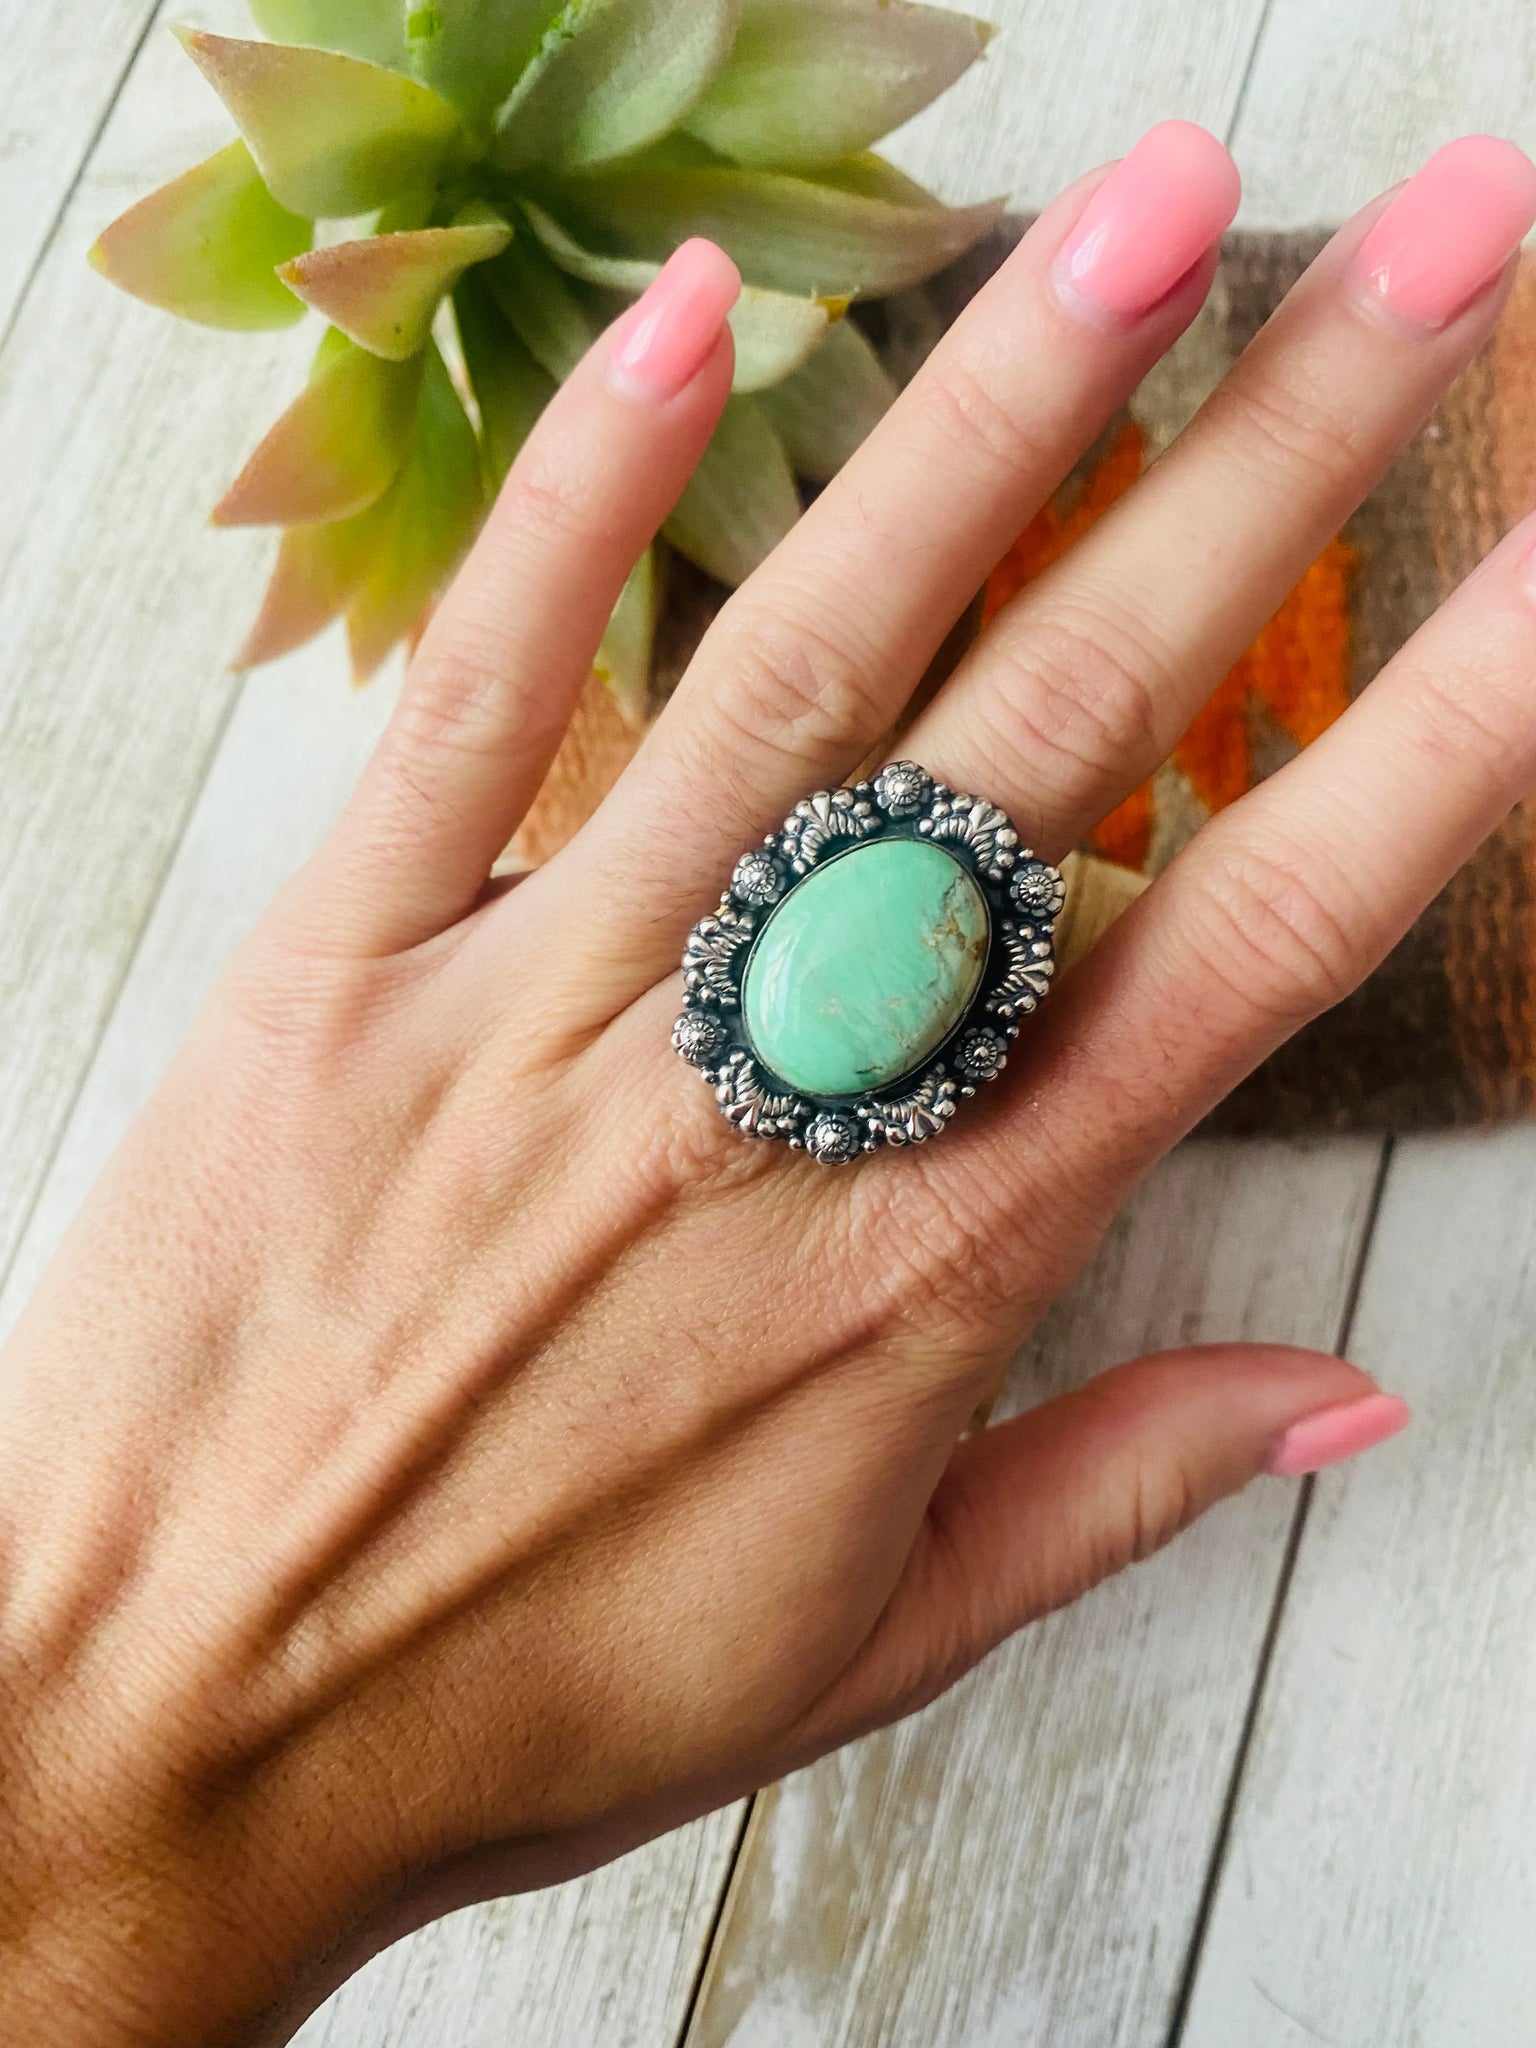 Sterling Silver & Turquoise Adjustable Ring